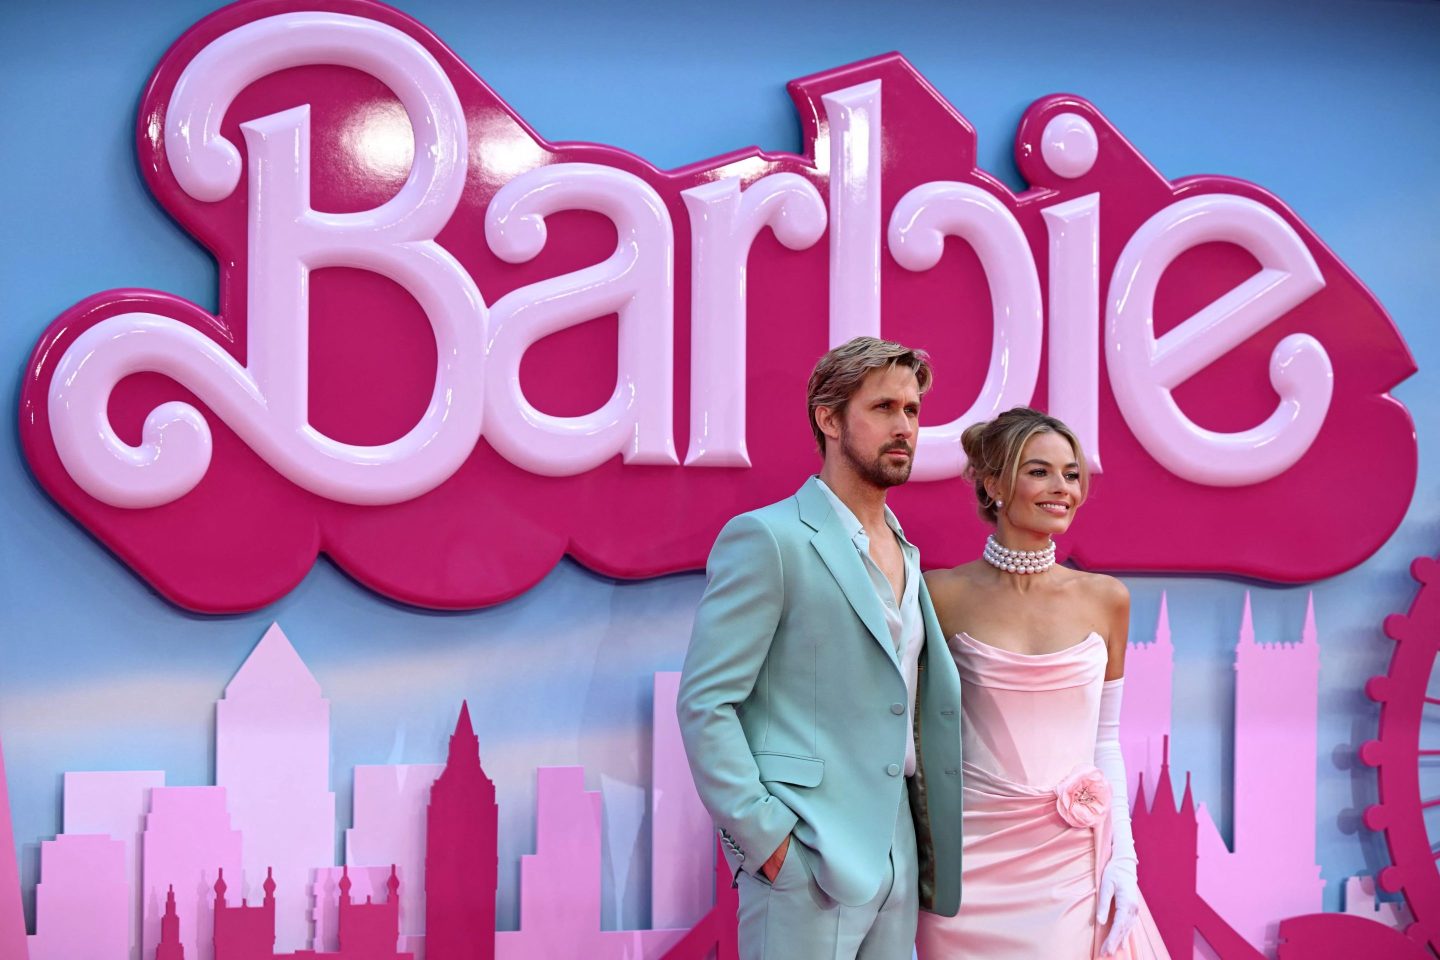 male and female actors posing in front of pink "Barbie" sign